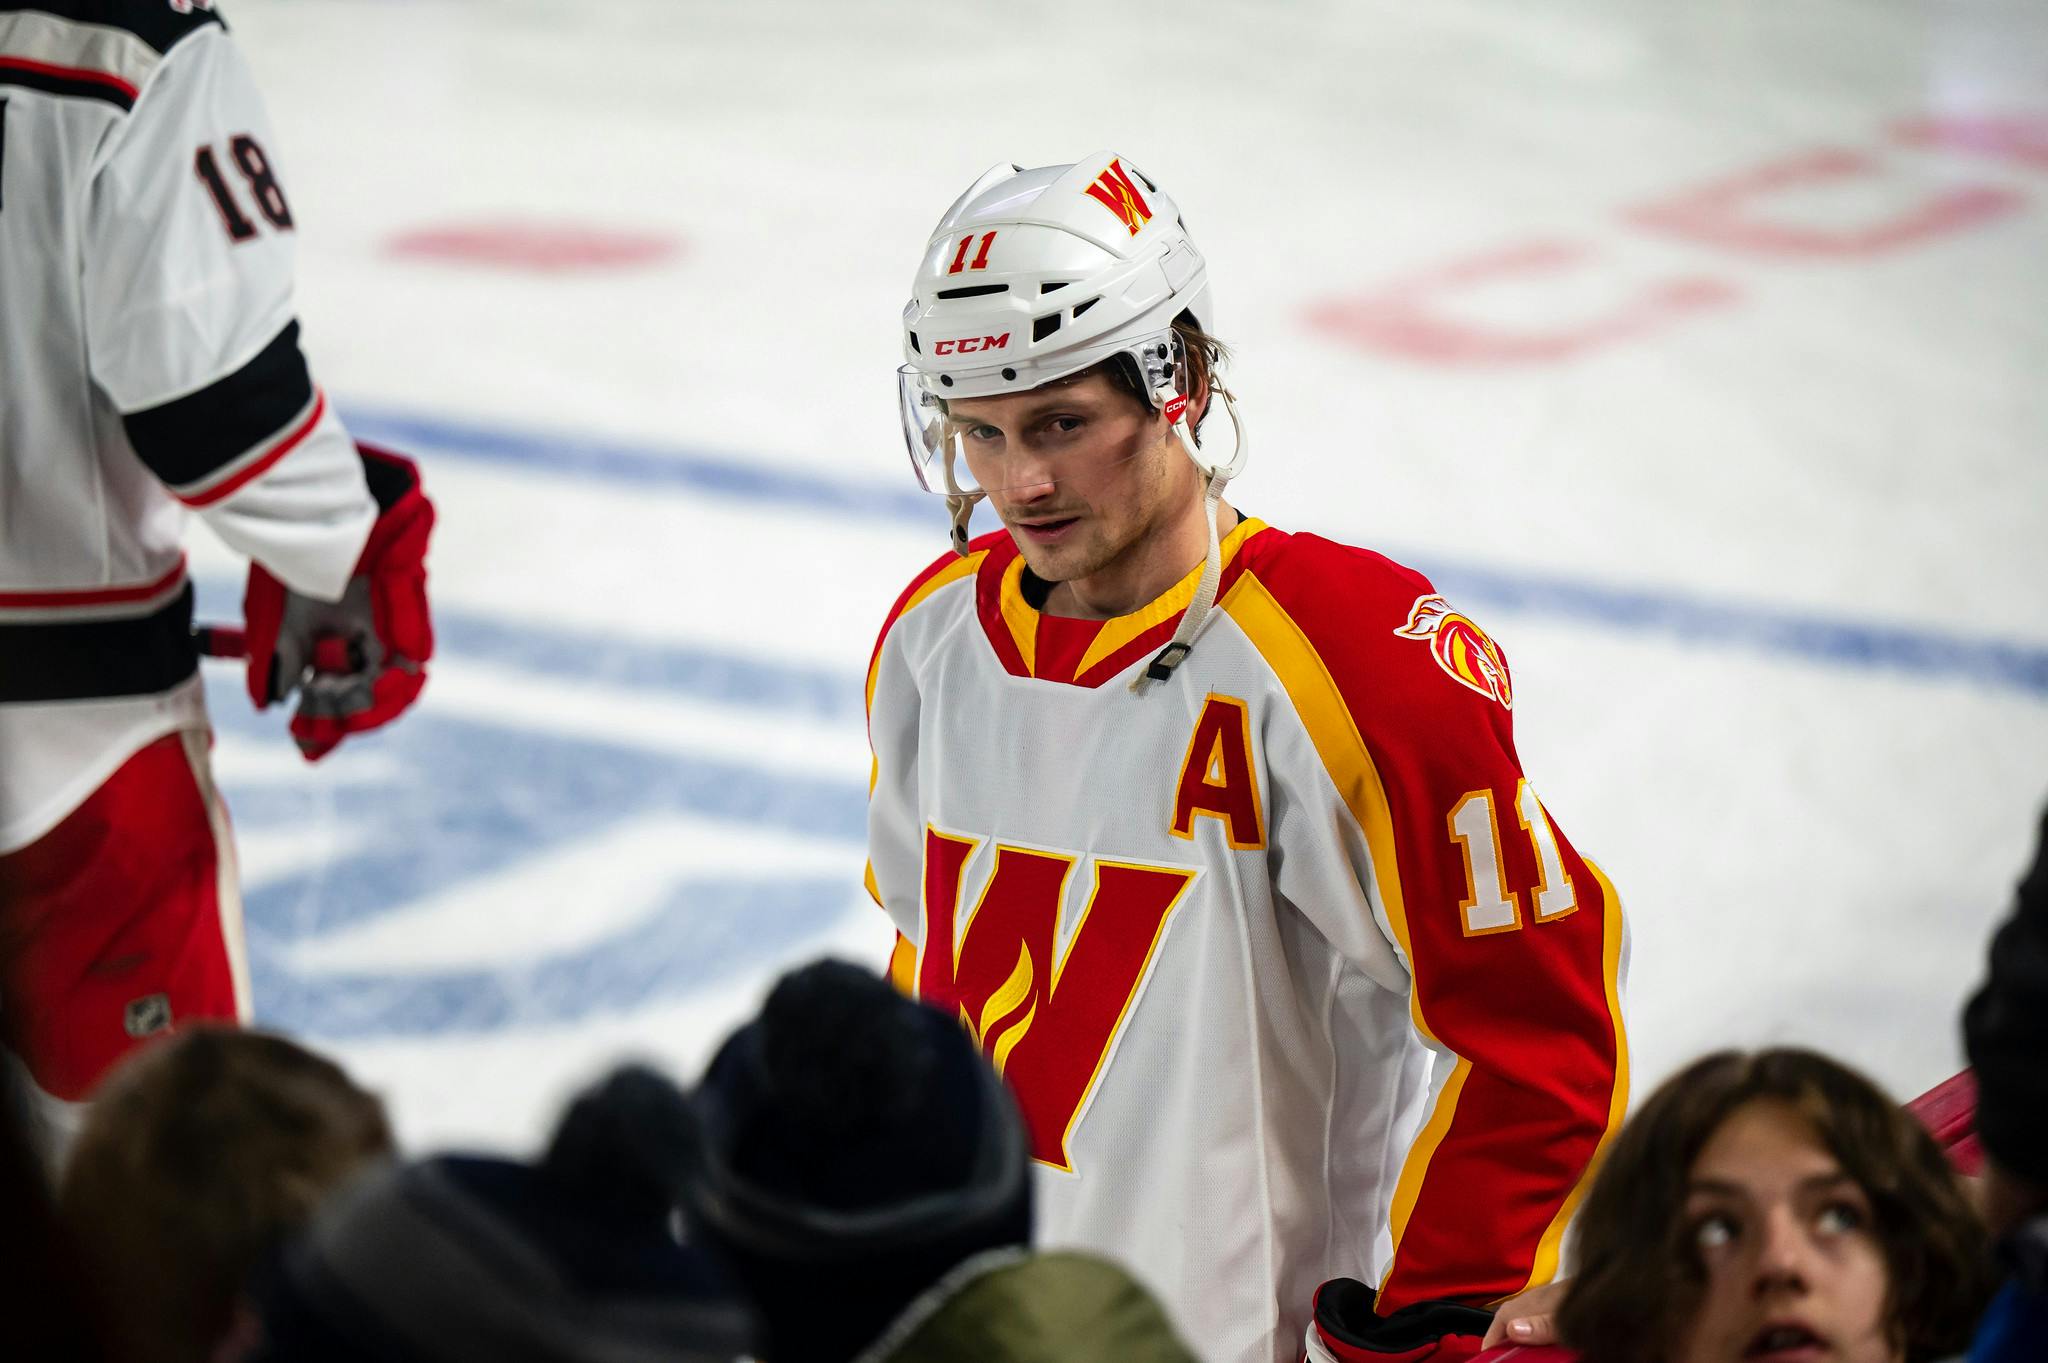 Calgary Flames: Three former players make Team Canada Olympic roster